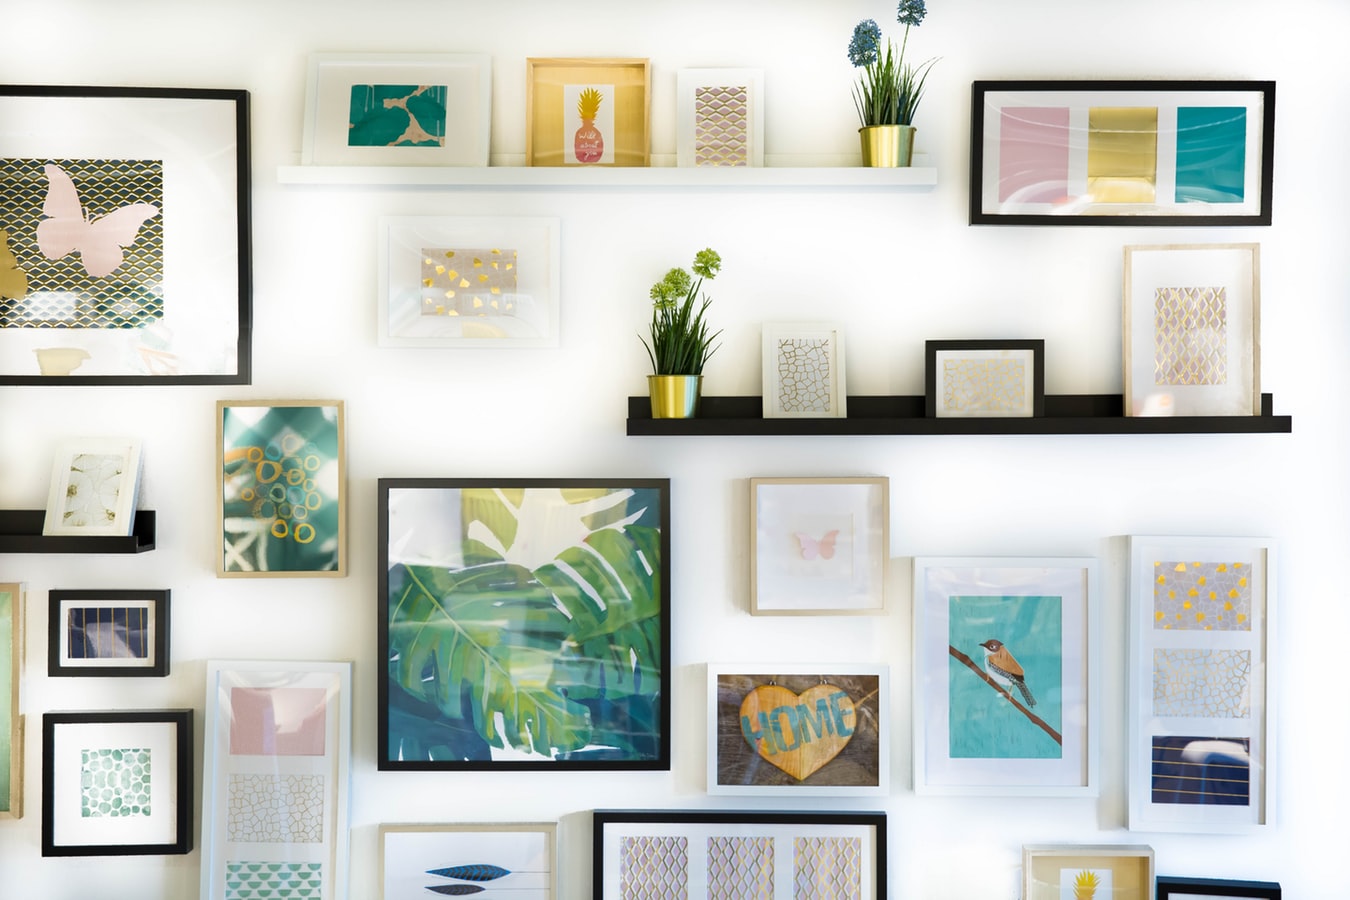 How to Pick the Right Framed Art to Give as a Gift